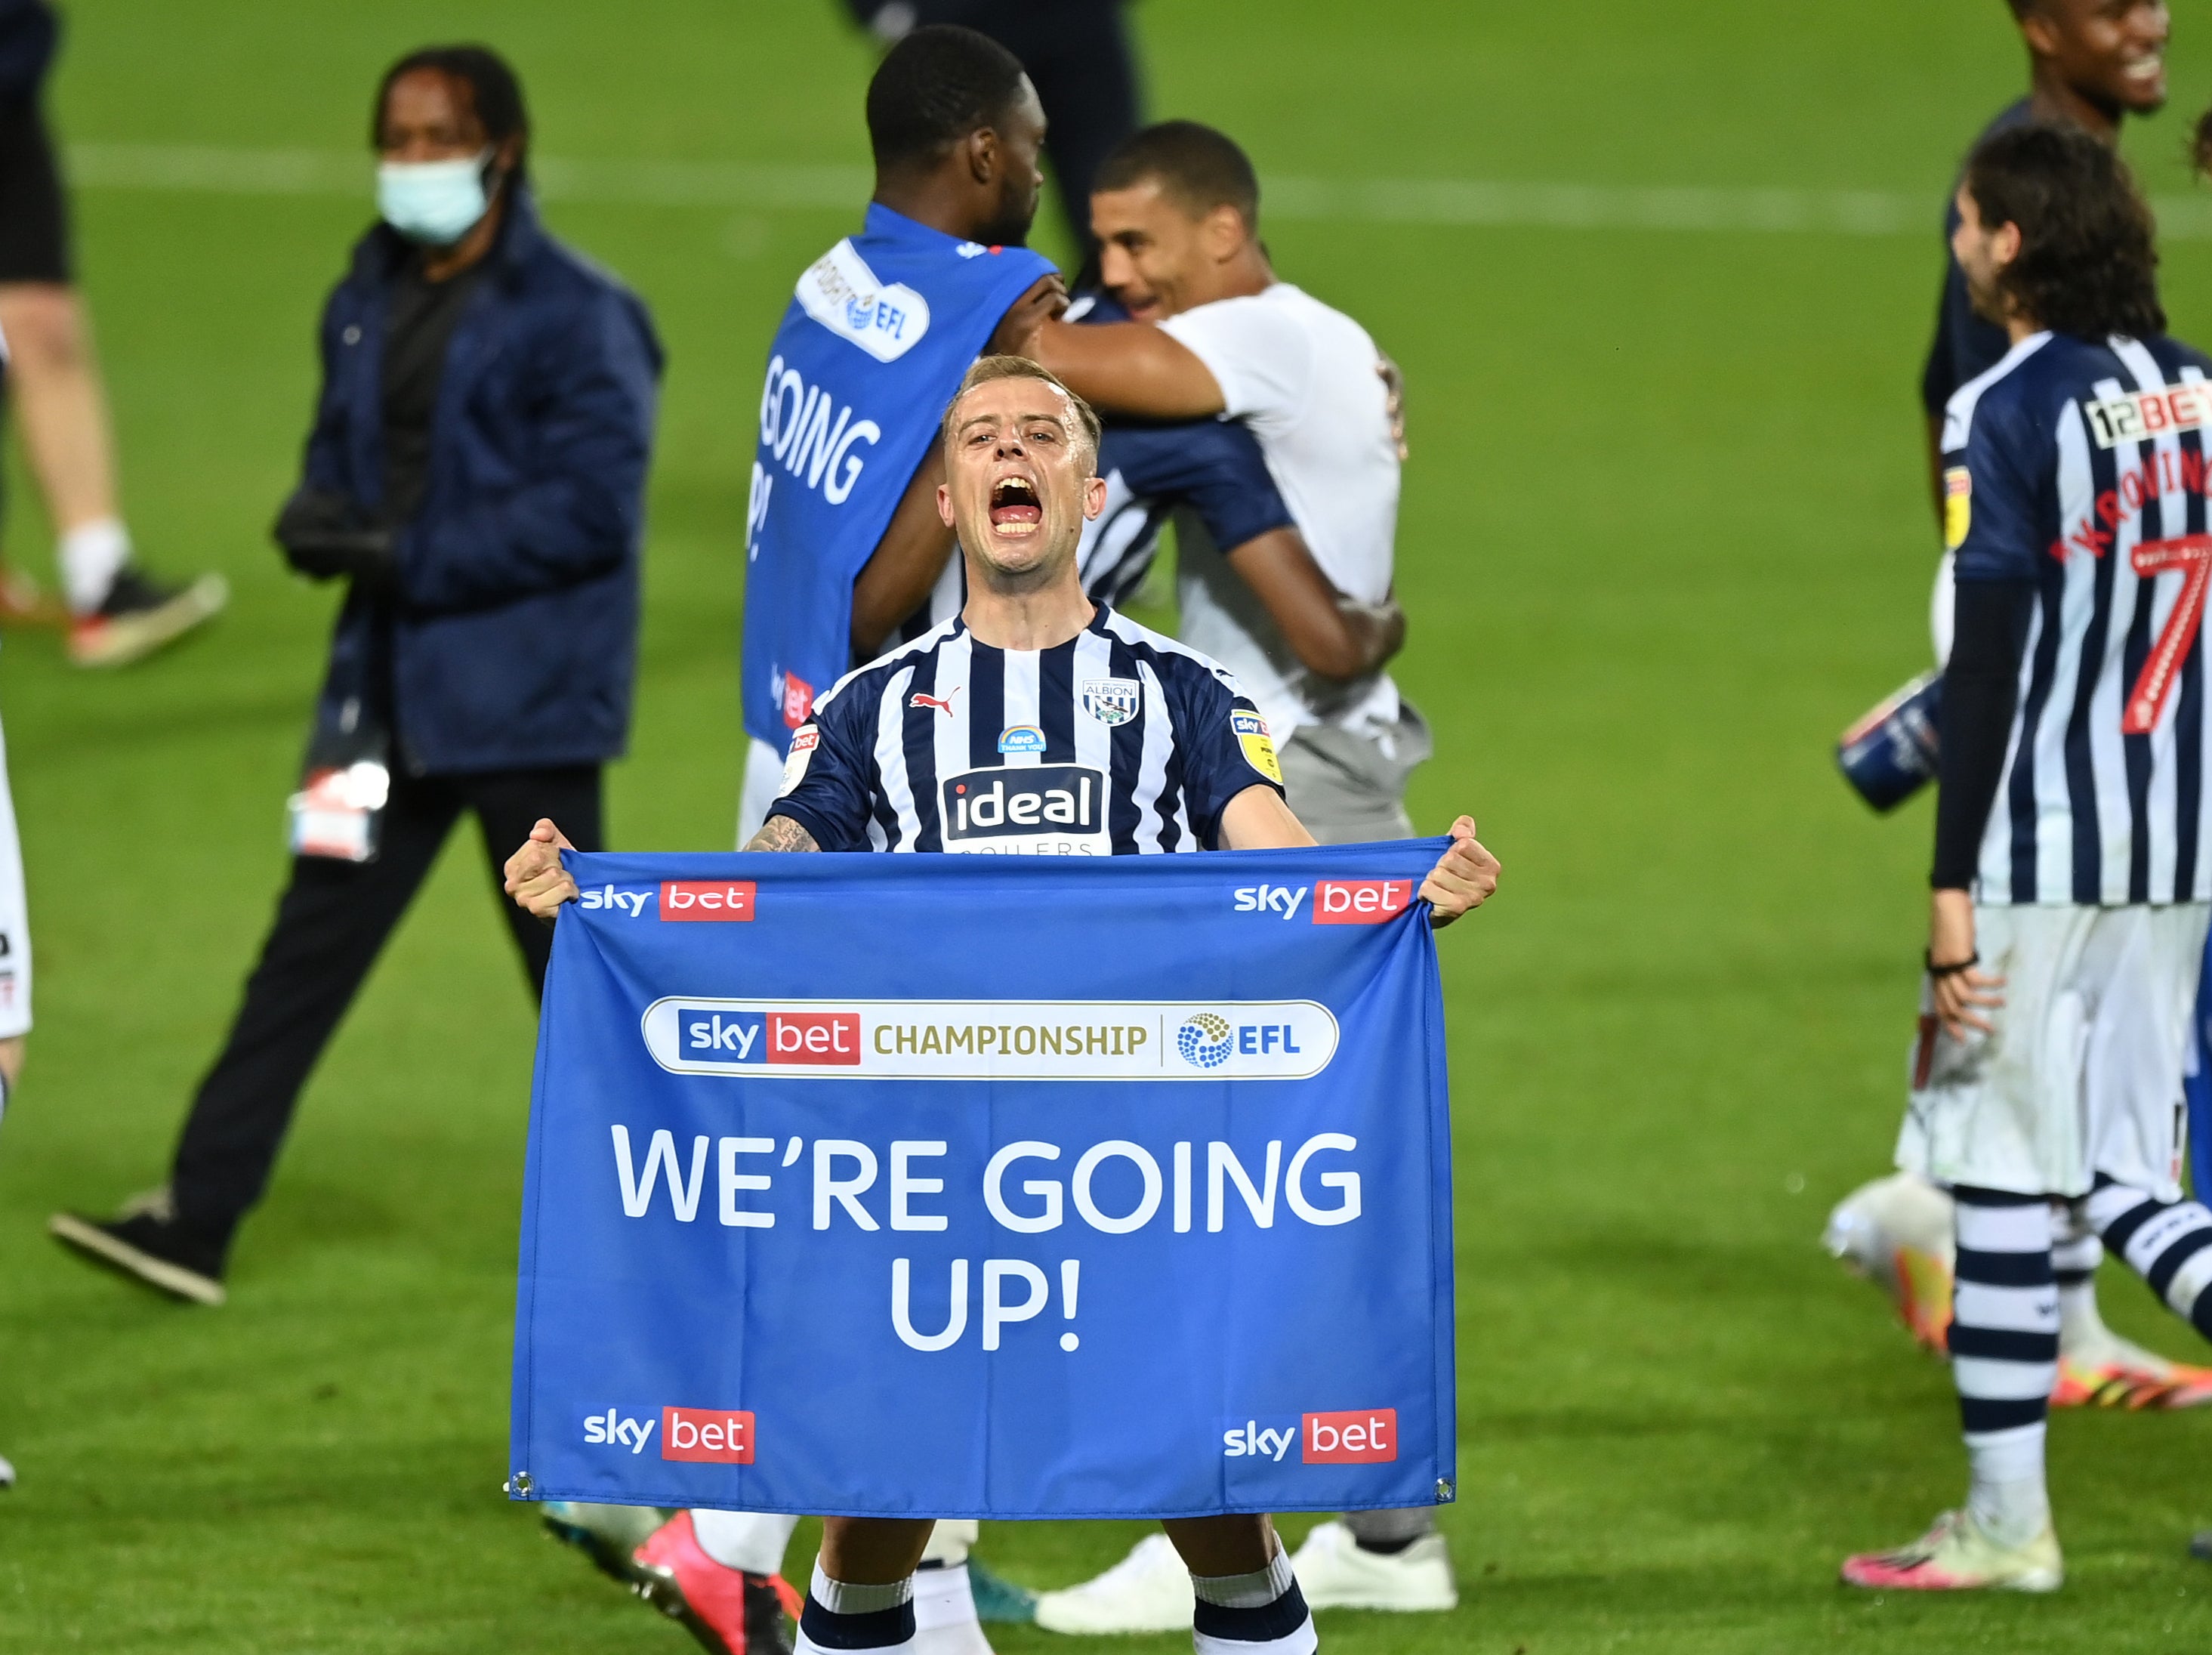 West Brom were promoted to the Premier League last season